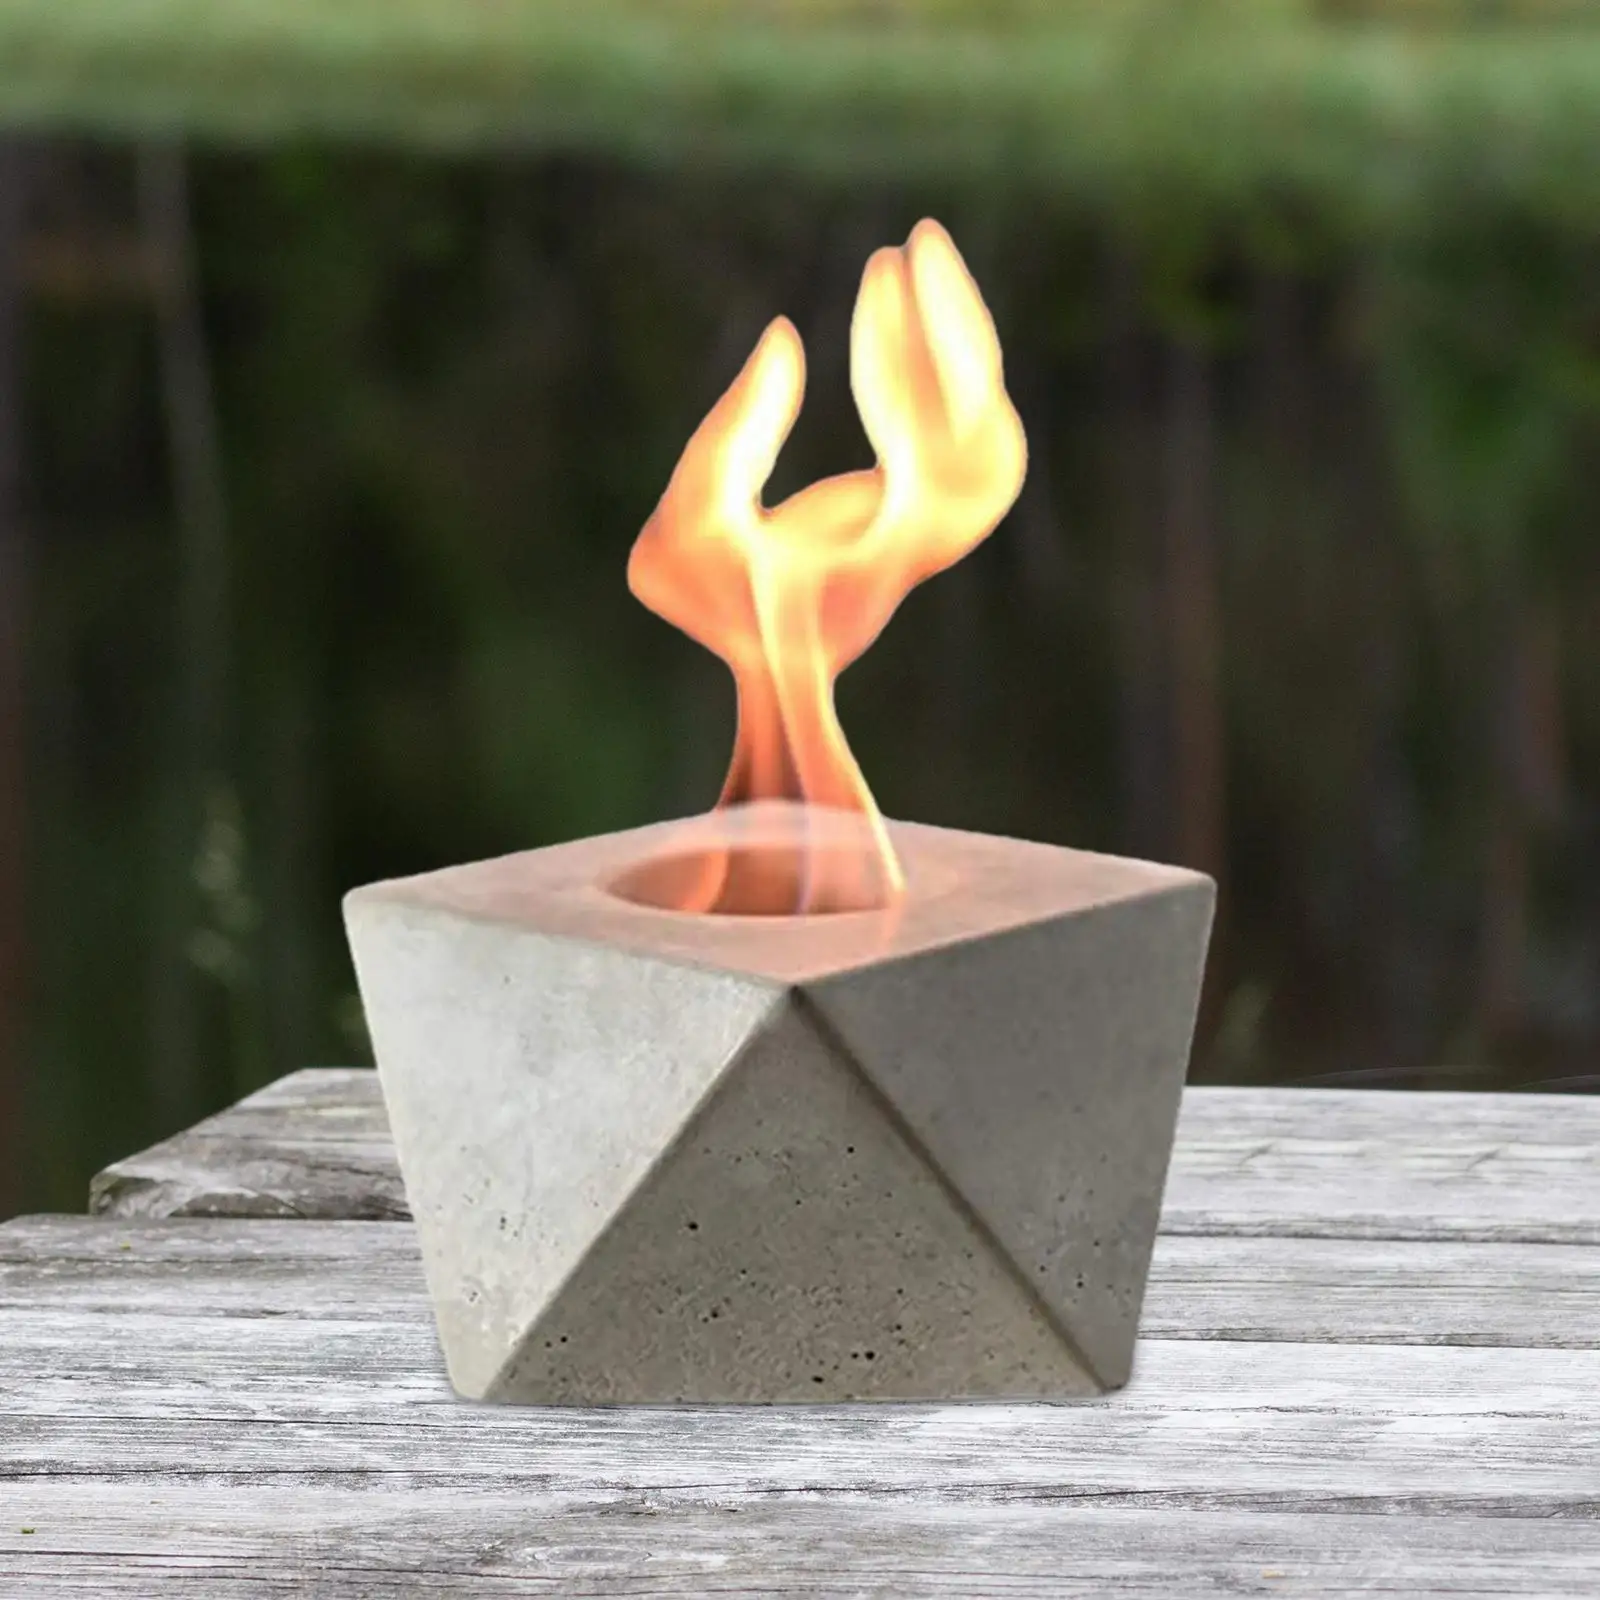 Table Top Firepit Small Lightweight Portable Gray Fireplace Compact Decorative Flame Bowl for Patio Balcony Home Garden Outdoor